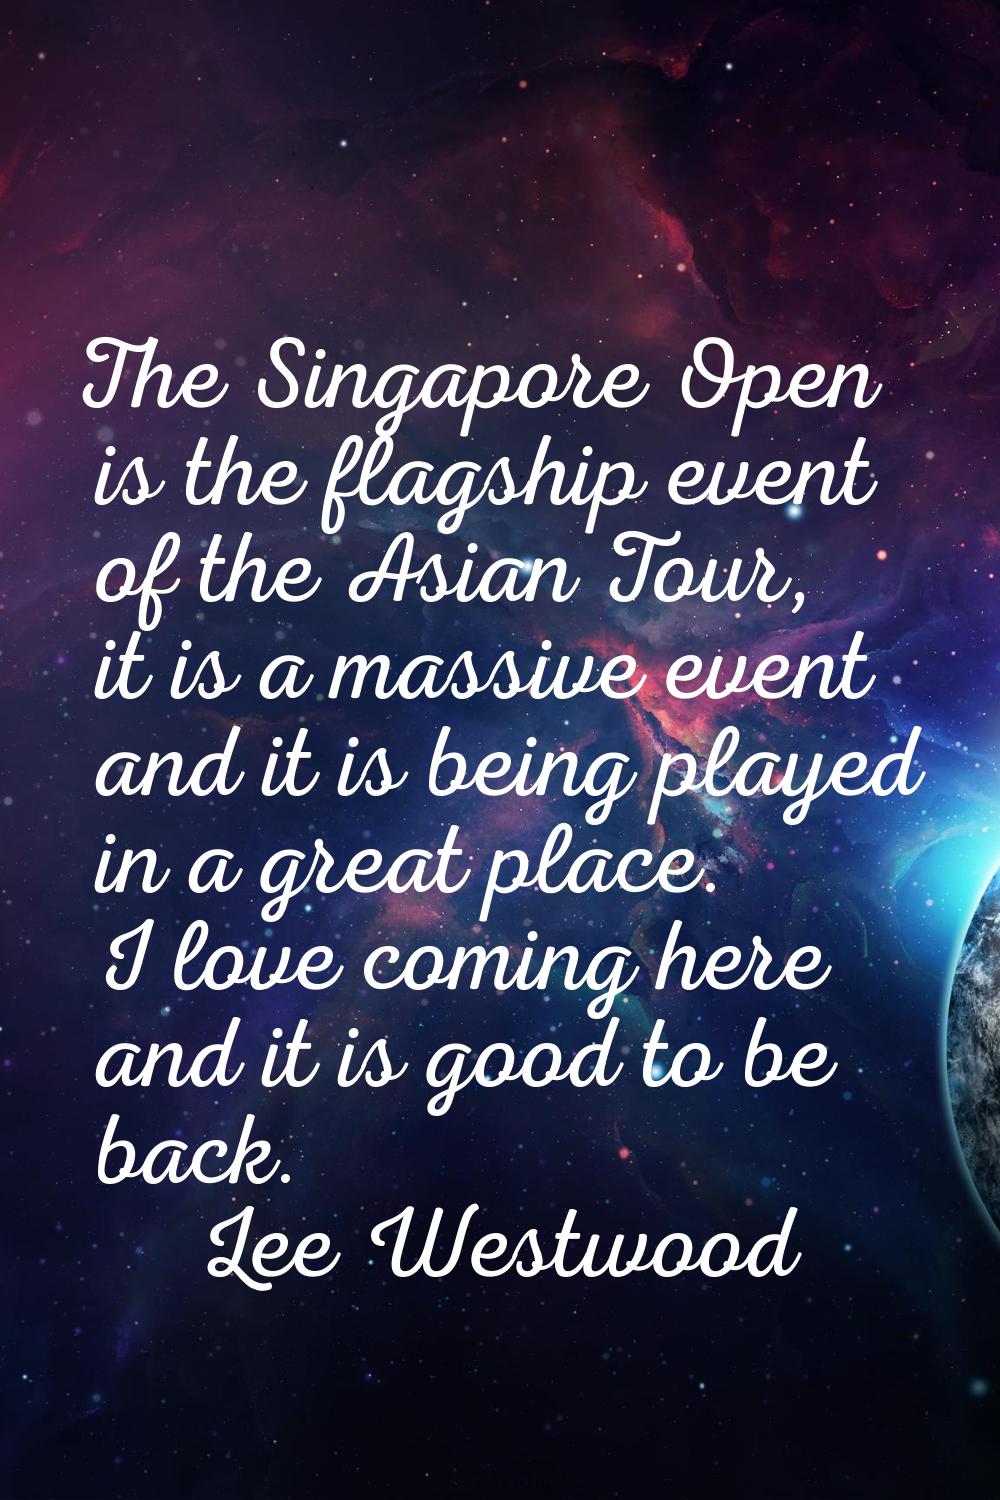 The Singapore Open is the flagship event of the Asian Tour, it is a massive event and it is being p